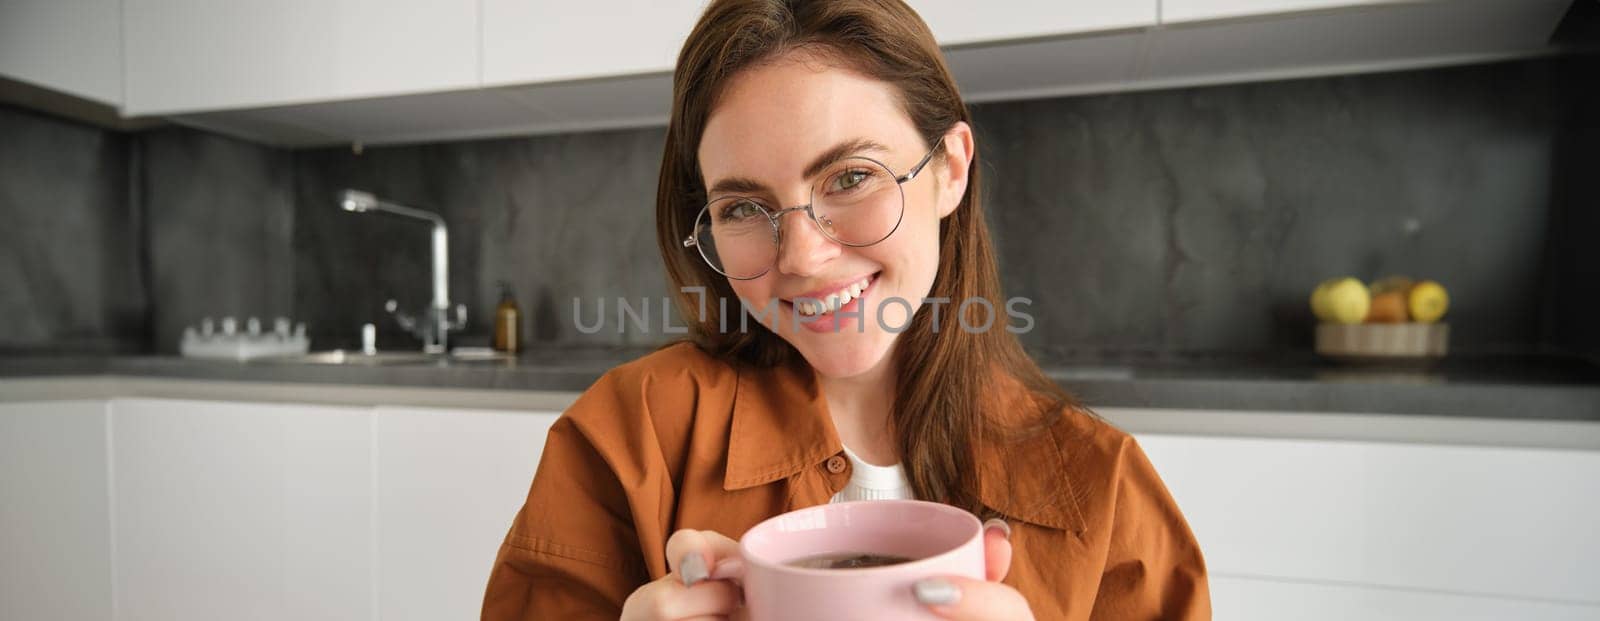 Close up portrait of beautiful woman in glasses, drinks tea, warms her hands with hot cup, smiling and looking happy at camera, sitting in kitchen.